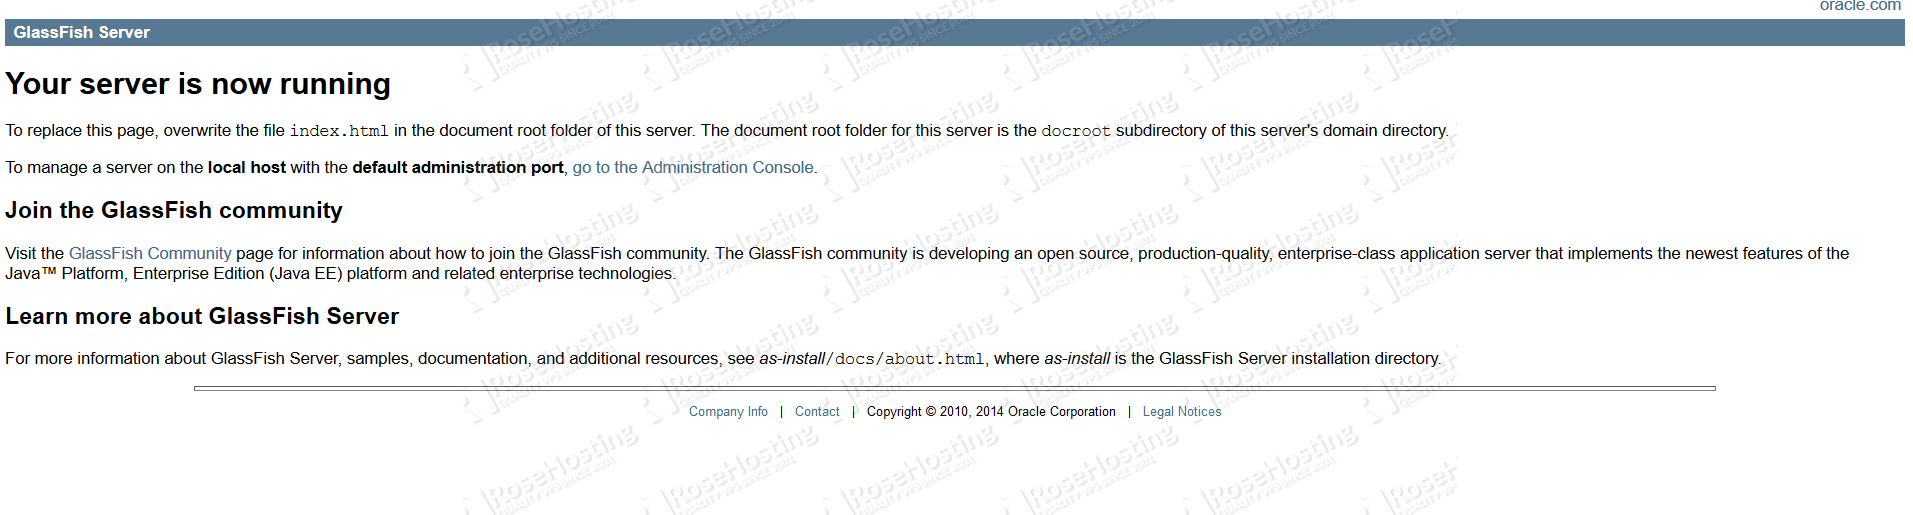 How to Install Glassfish 5 on CentOS 7